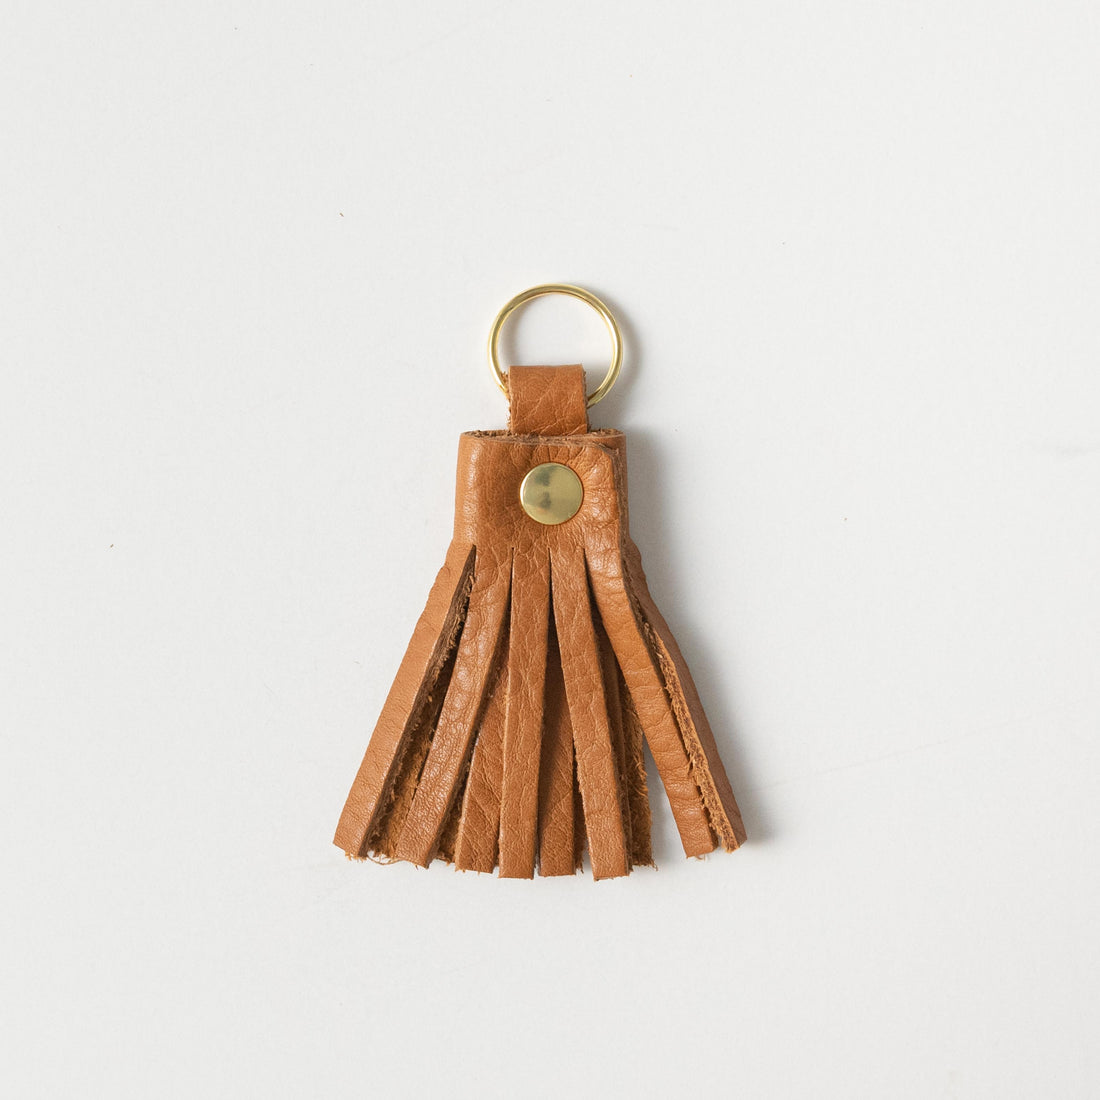 Black Hotel Key Fob | Leather Keychain Made in America at KMM & Co. Yes